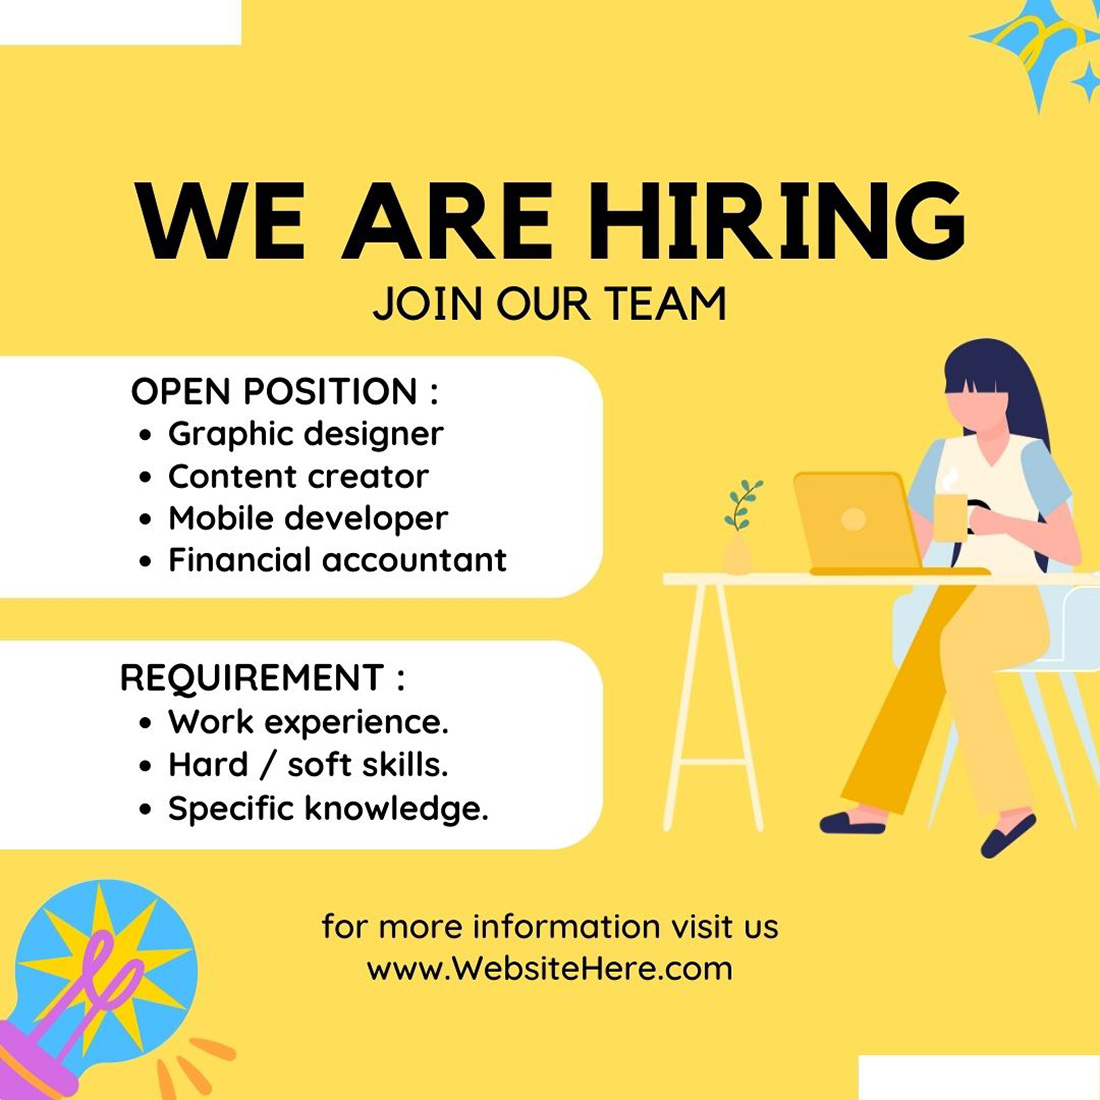 5 We are hiring poster job banner or social media post template cover image.